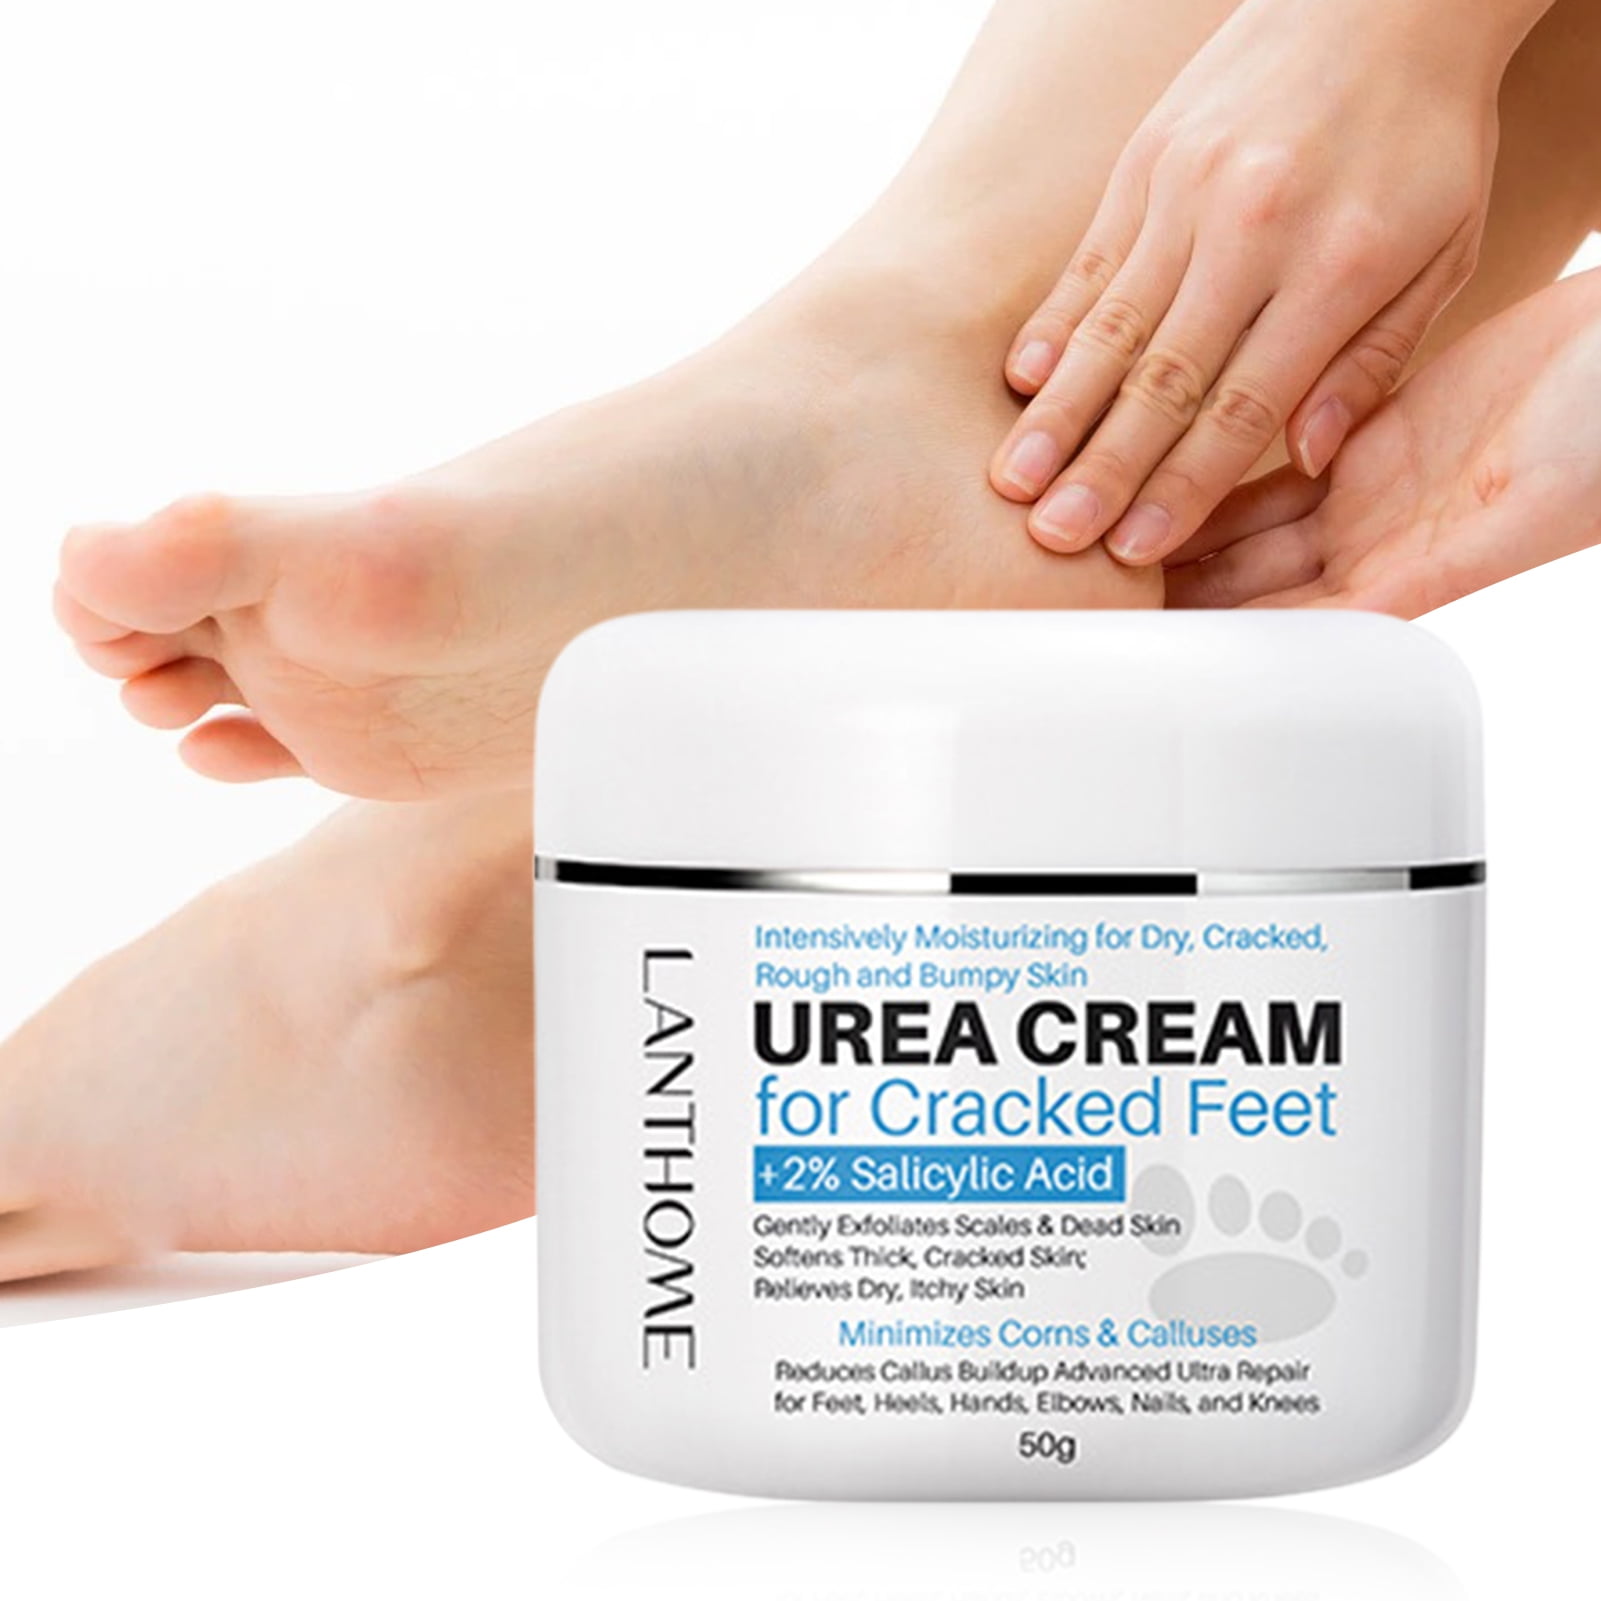 Dr Foot Foot Repair Cream, Foot Fungus, Dry Cracked Feet and Smelly –  Drfootin